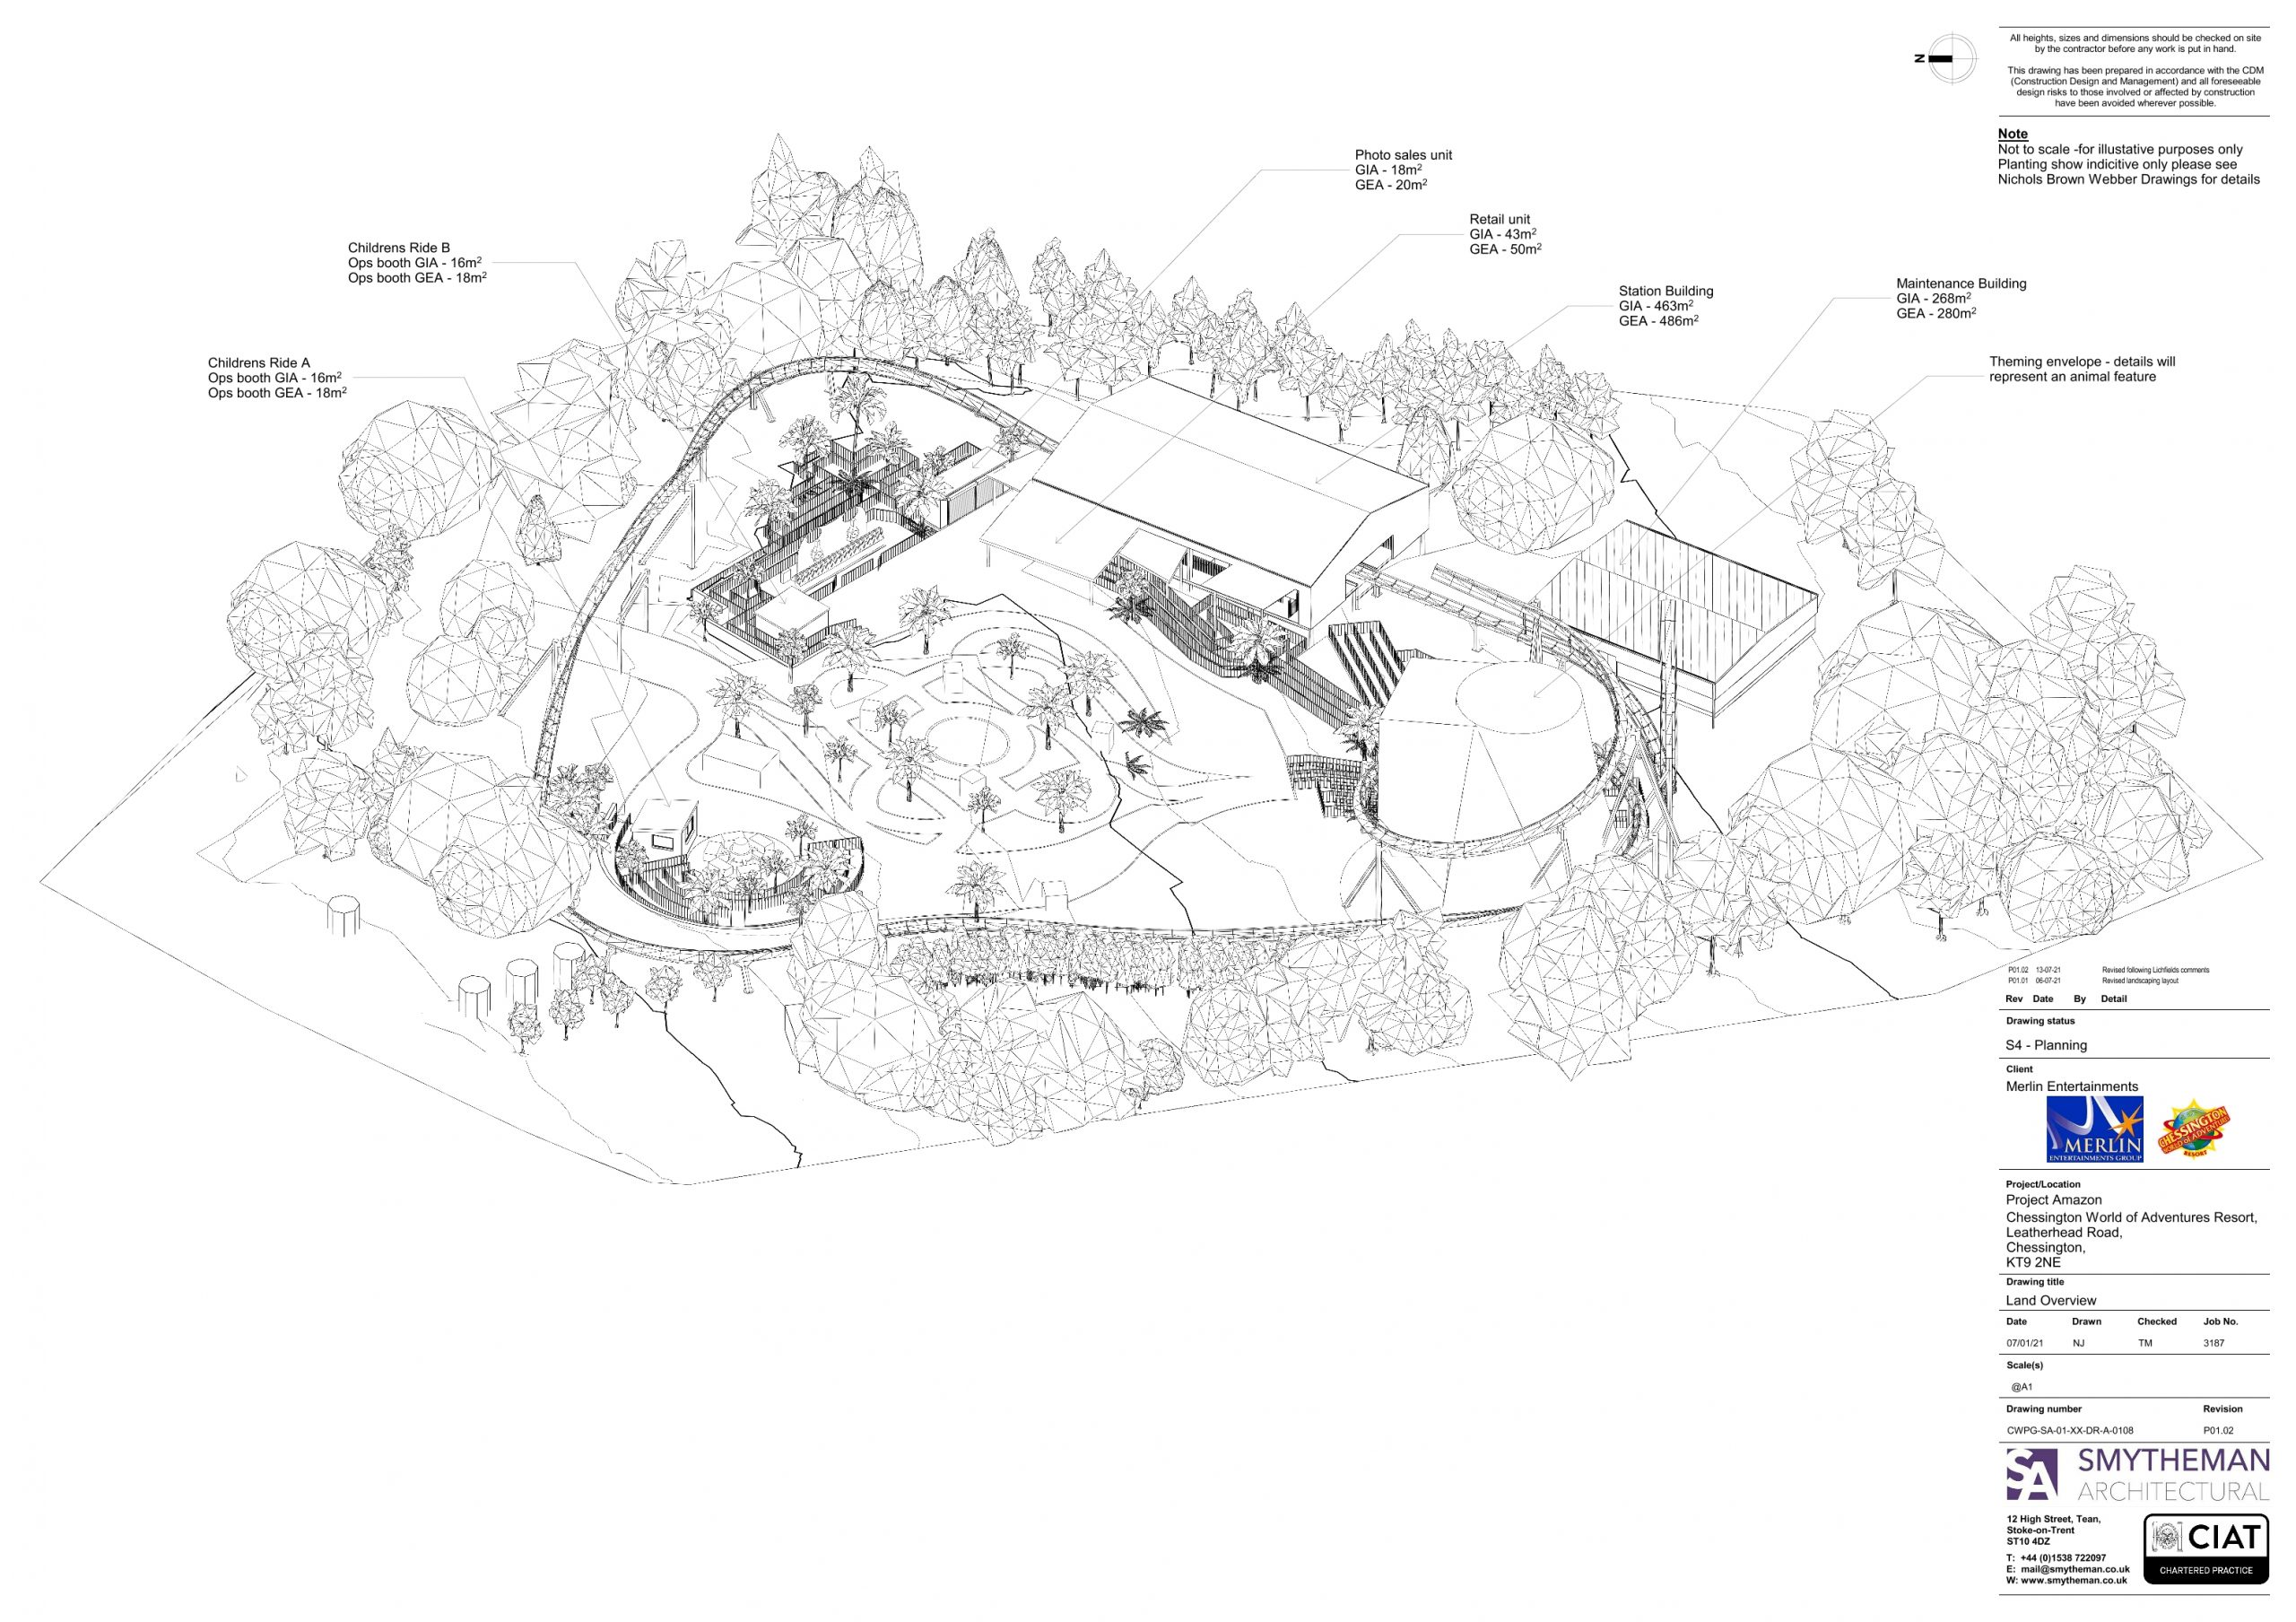 CWPG-SA-01-XX-DR-A-0108-P1.02_LAND_OVERVIEW_GIA-4922521-scaled.jpg